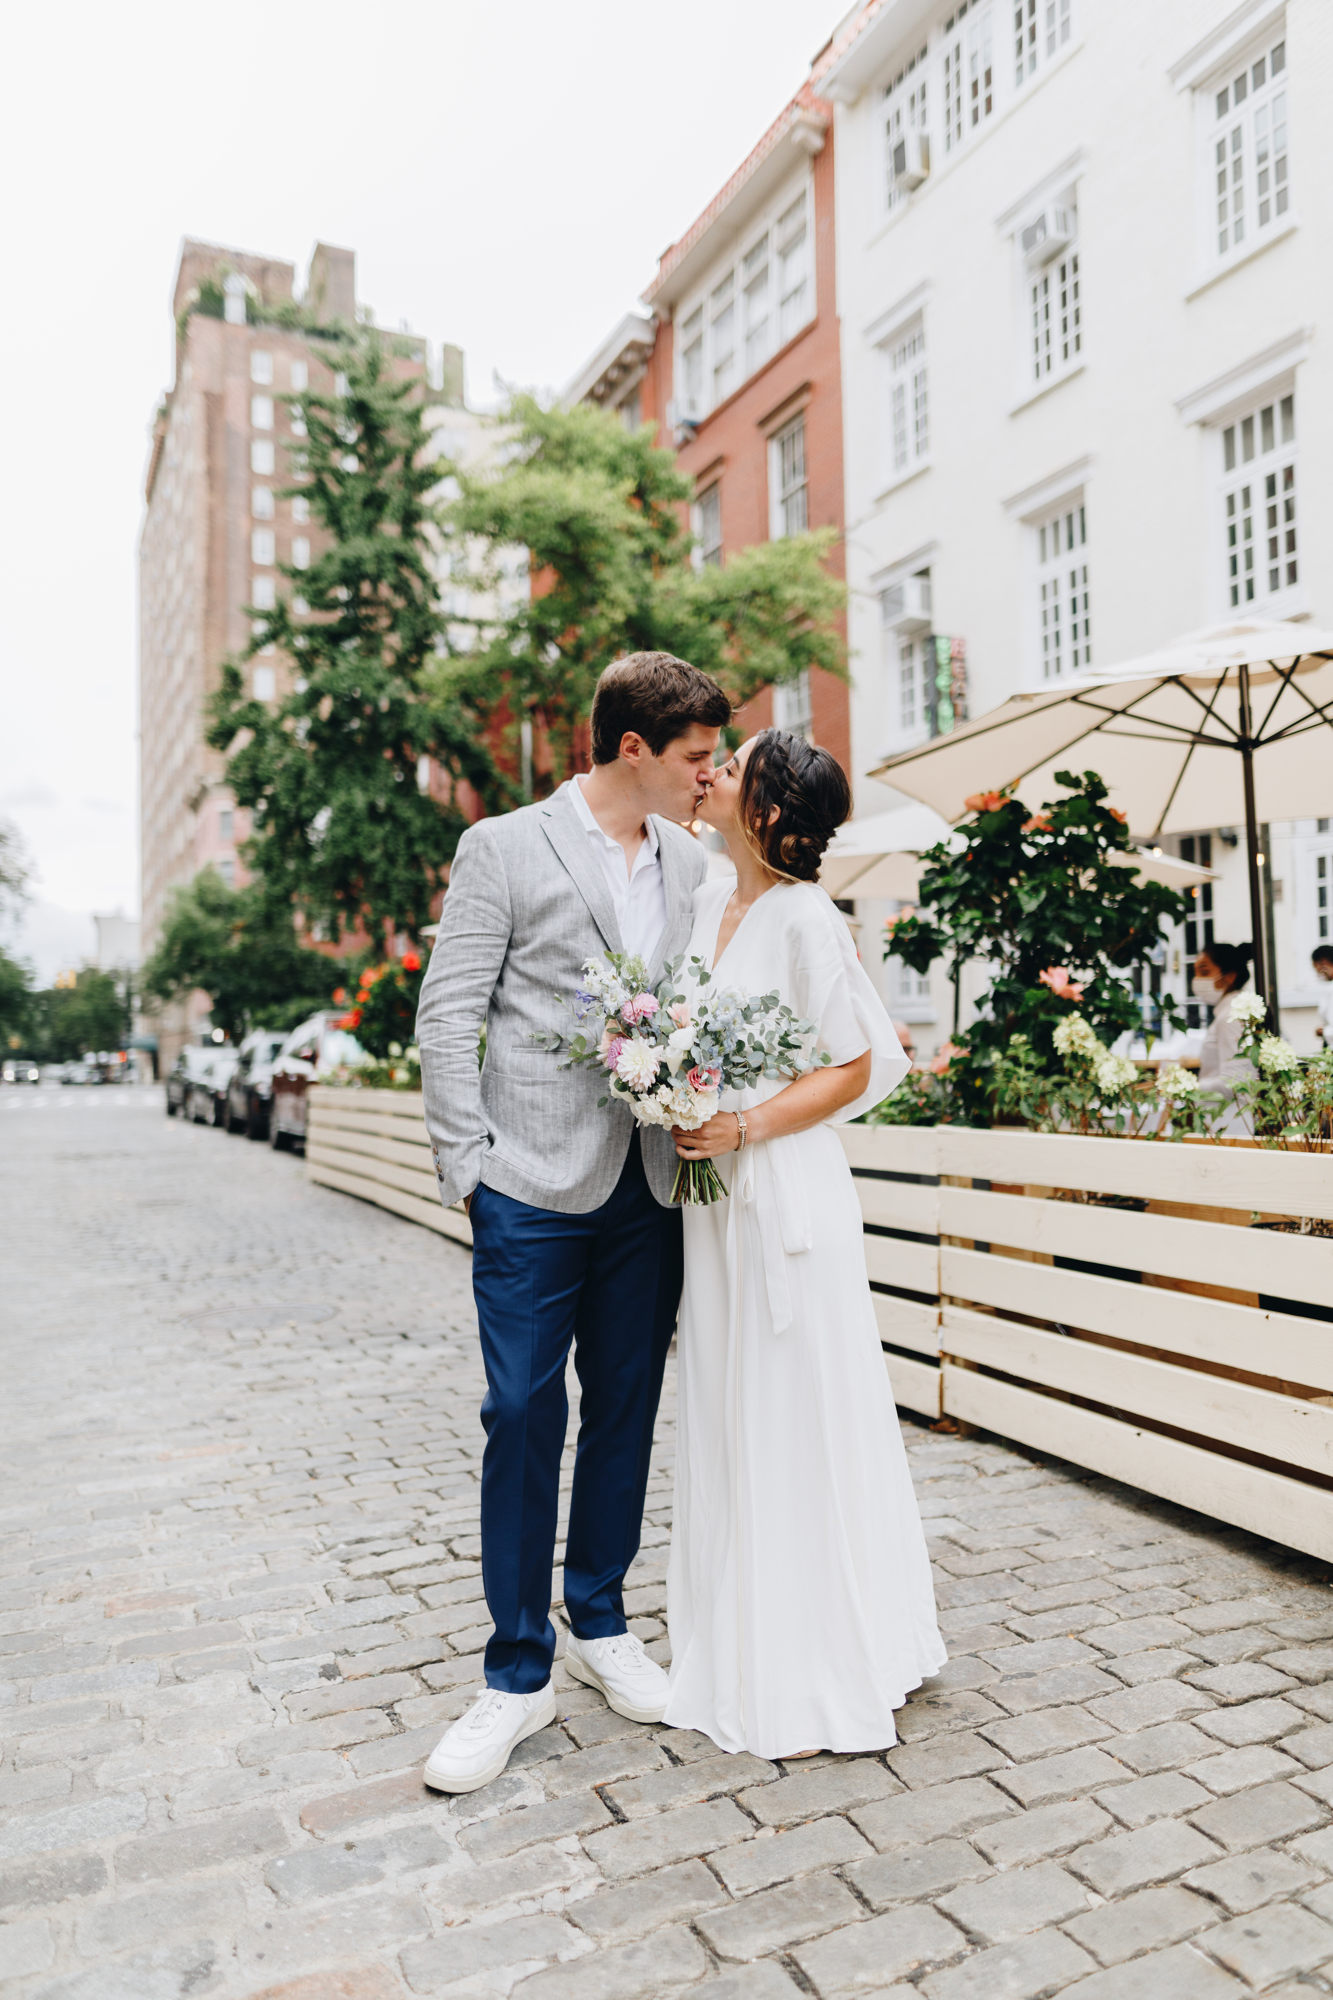 Elopement photos in NYC during the summer